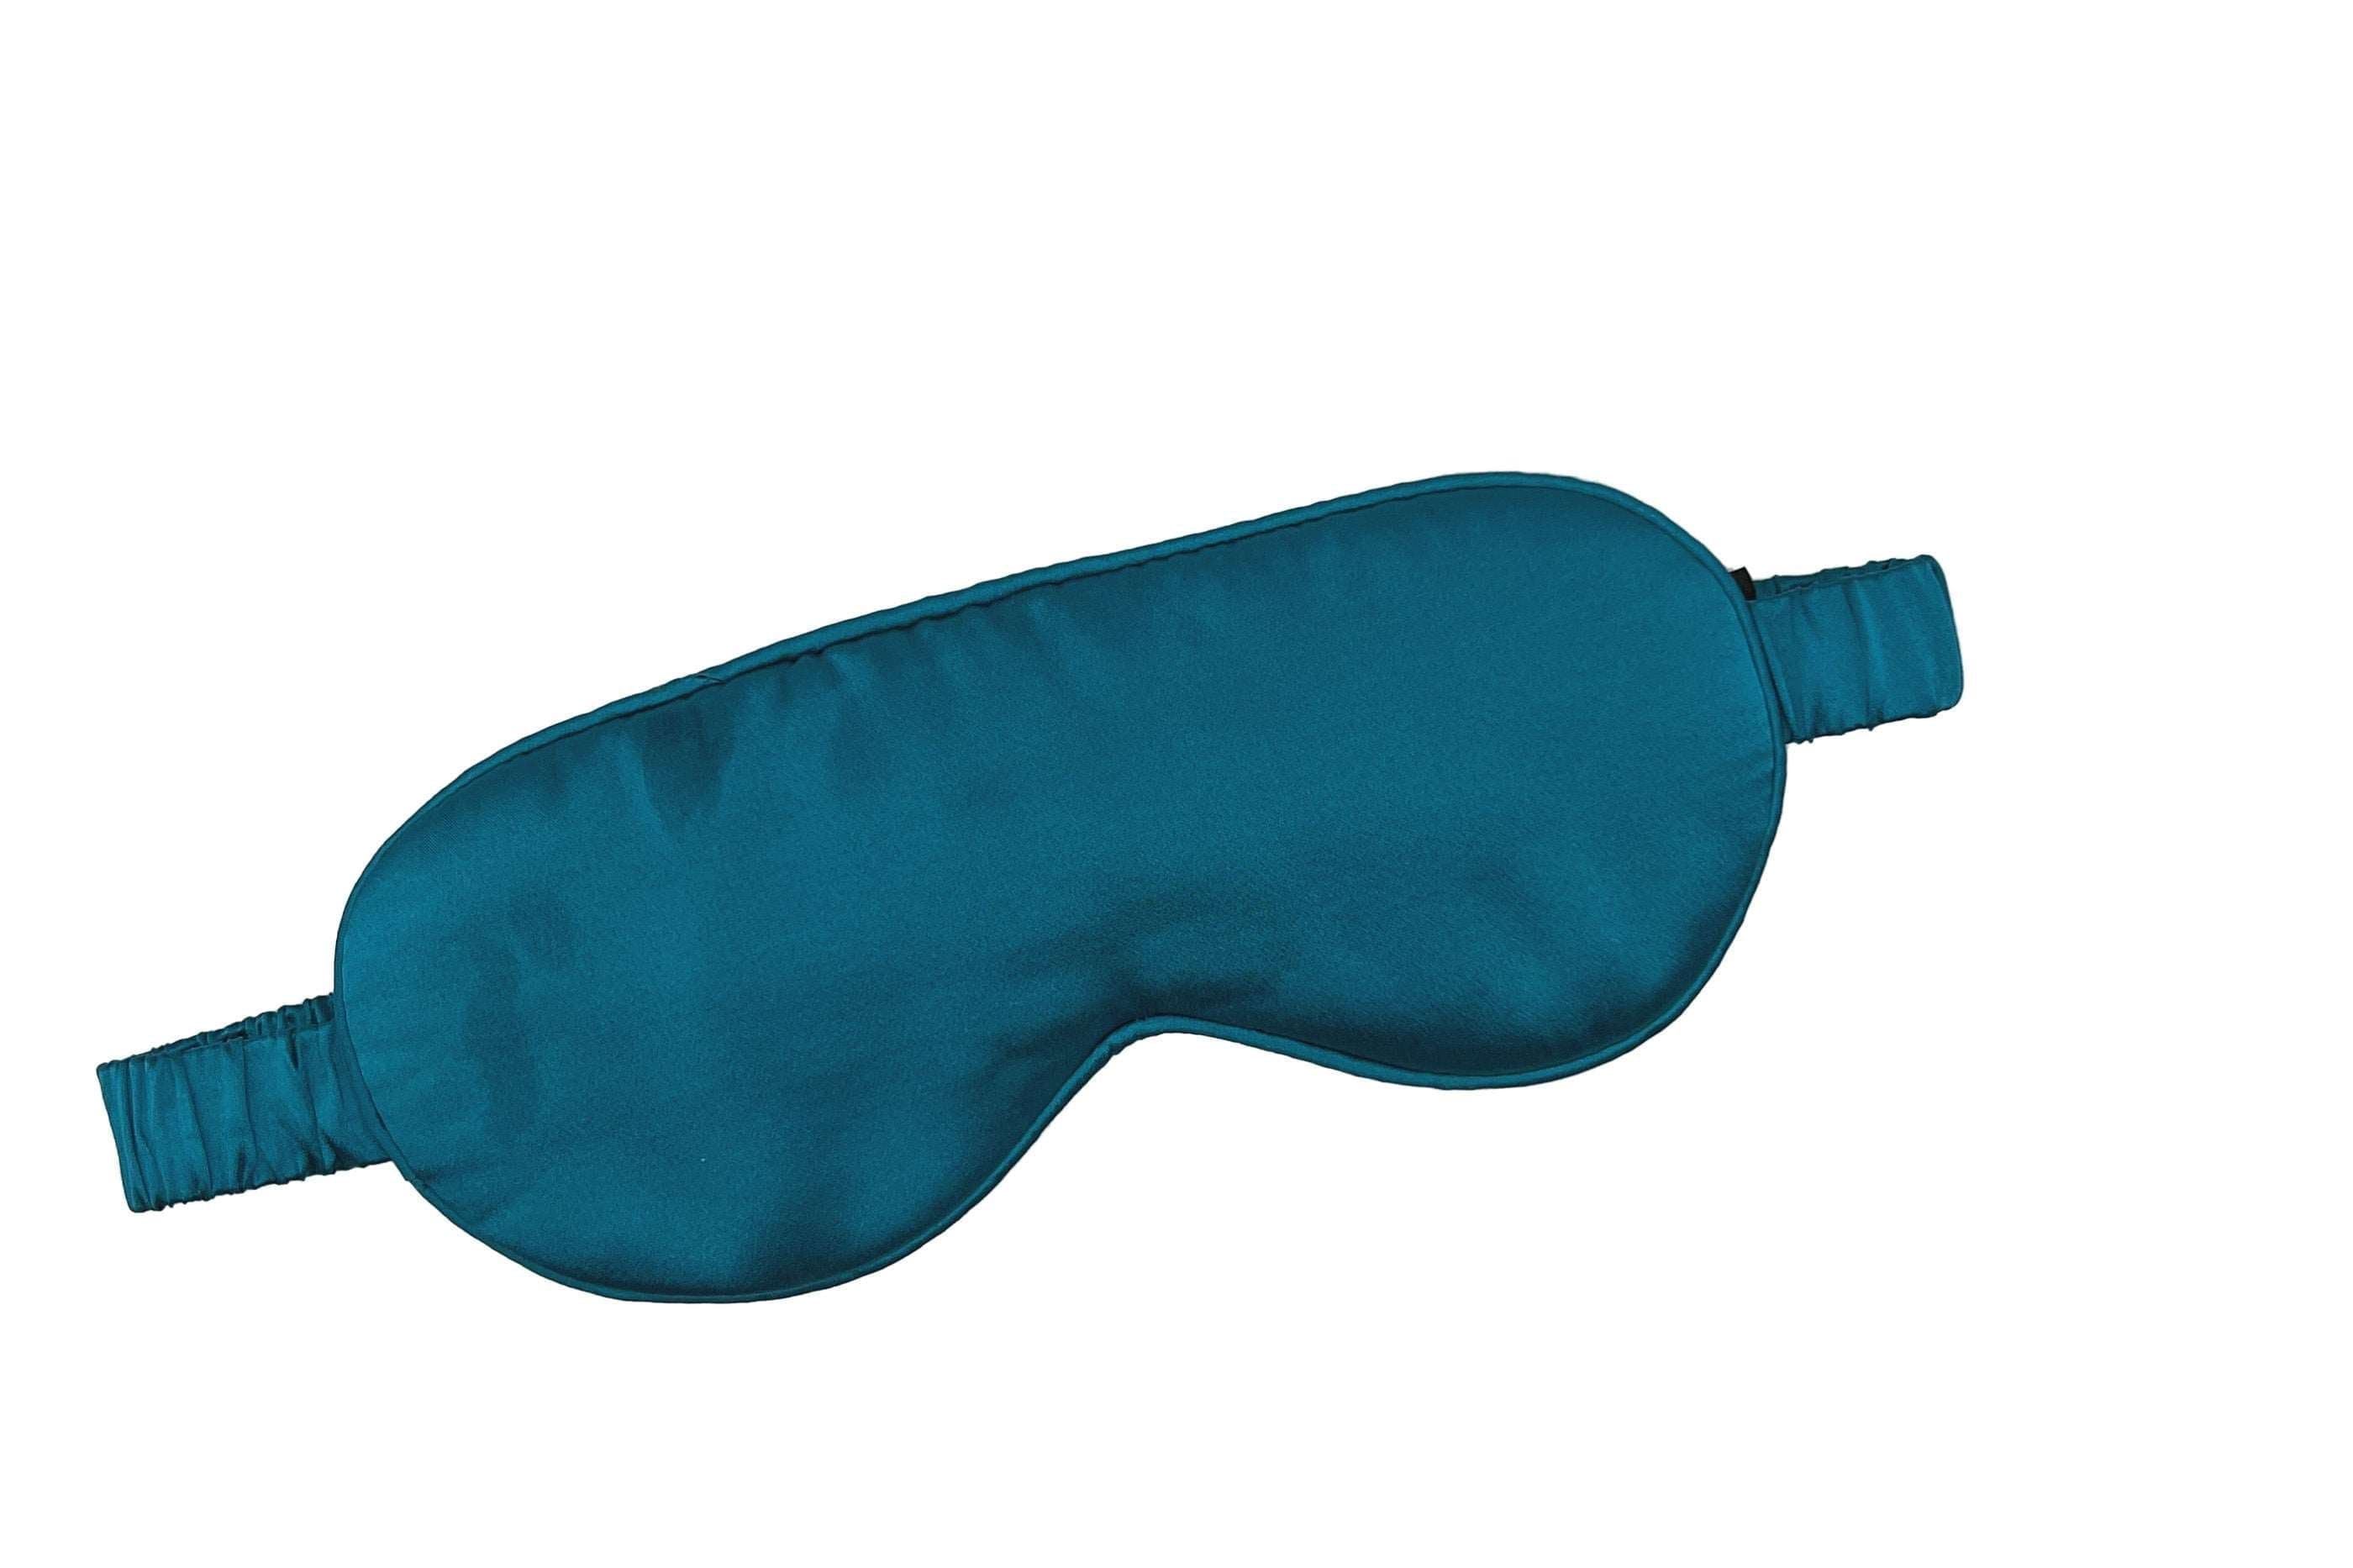 Pure Mulberry Silk Eyemask From Silksouq & Silksouk, Also Known As Silk Souq In Uae